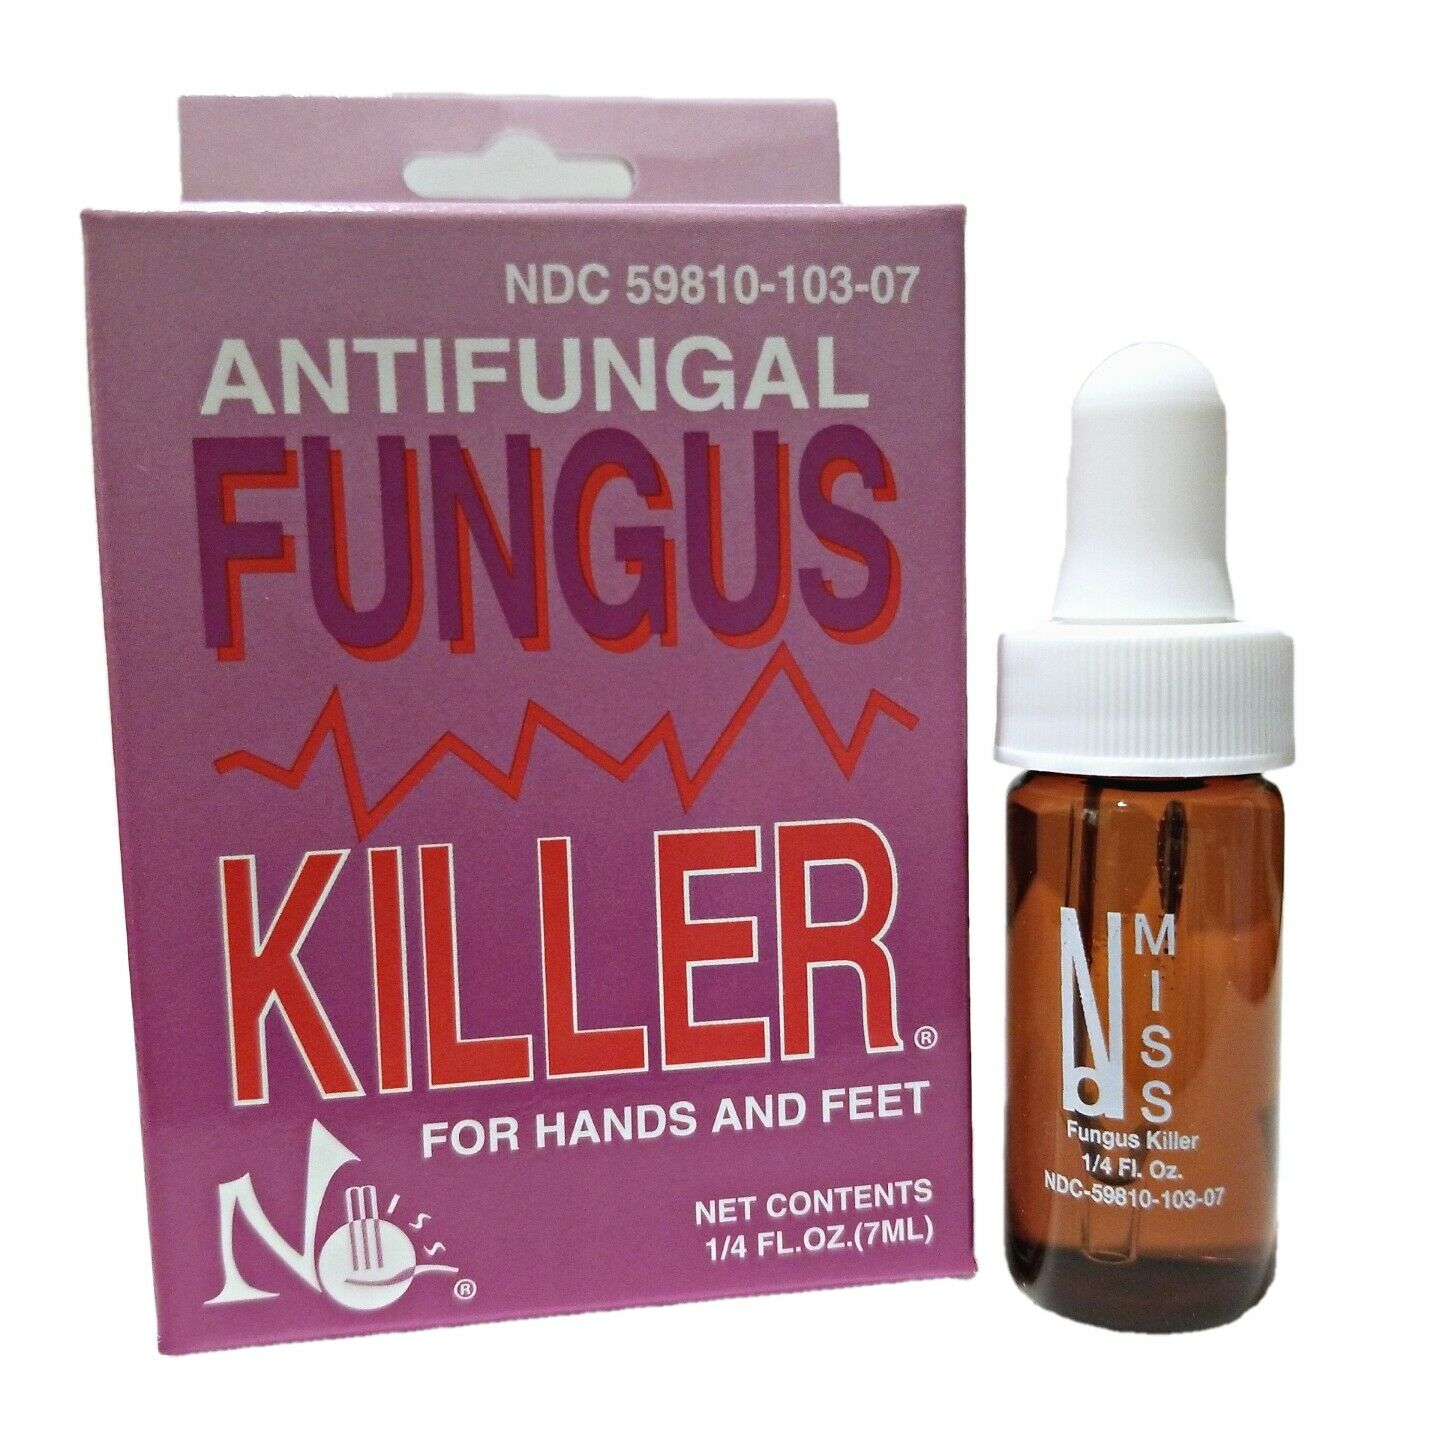 No Miss Antifungal Fungus Killer For Hands And Feet 1/4 Fl.oz. 7ml New Bottle